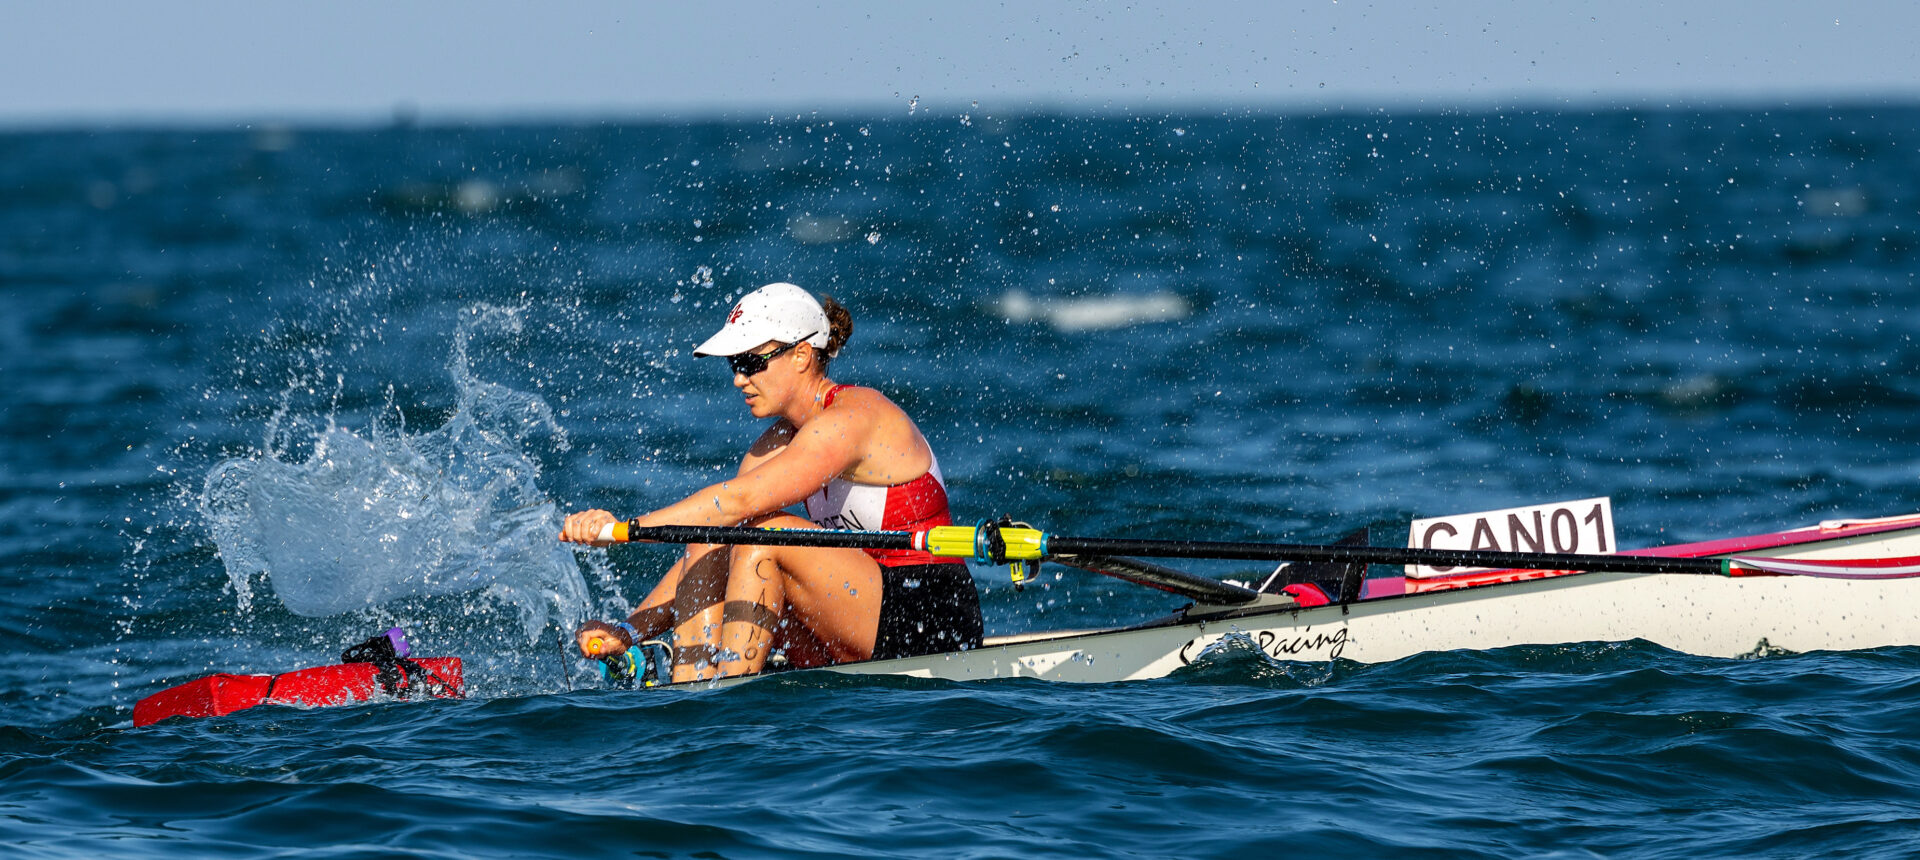 Coastal Rowing Makes Waves: A New Olympic Sport for Los Angeles 2028